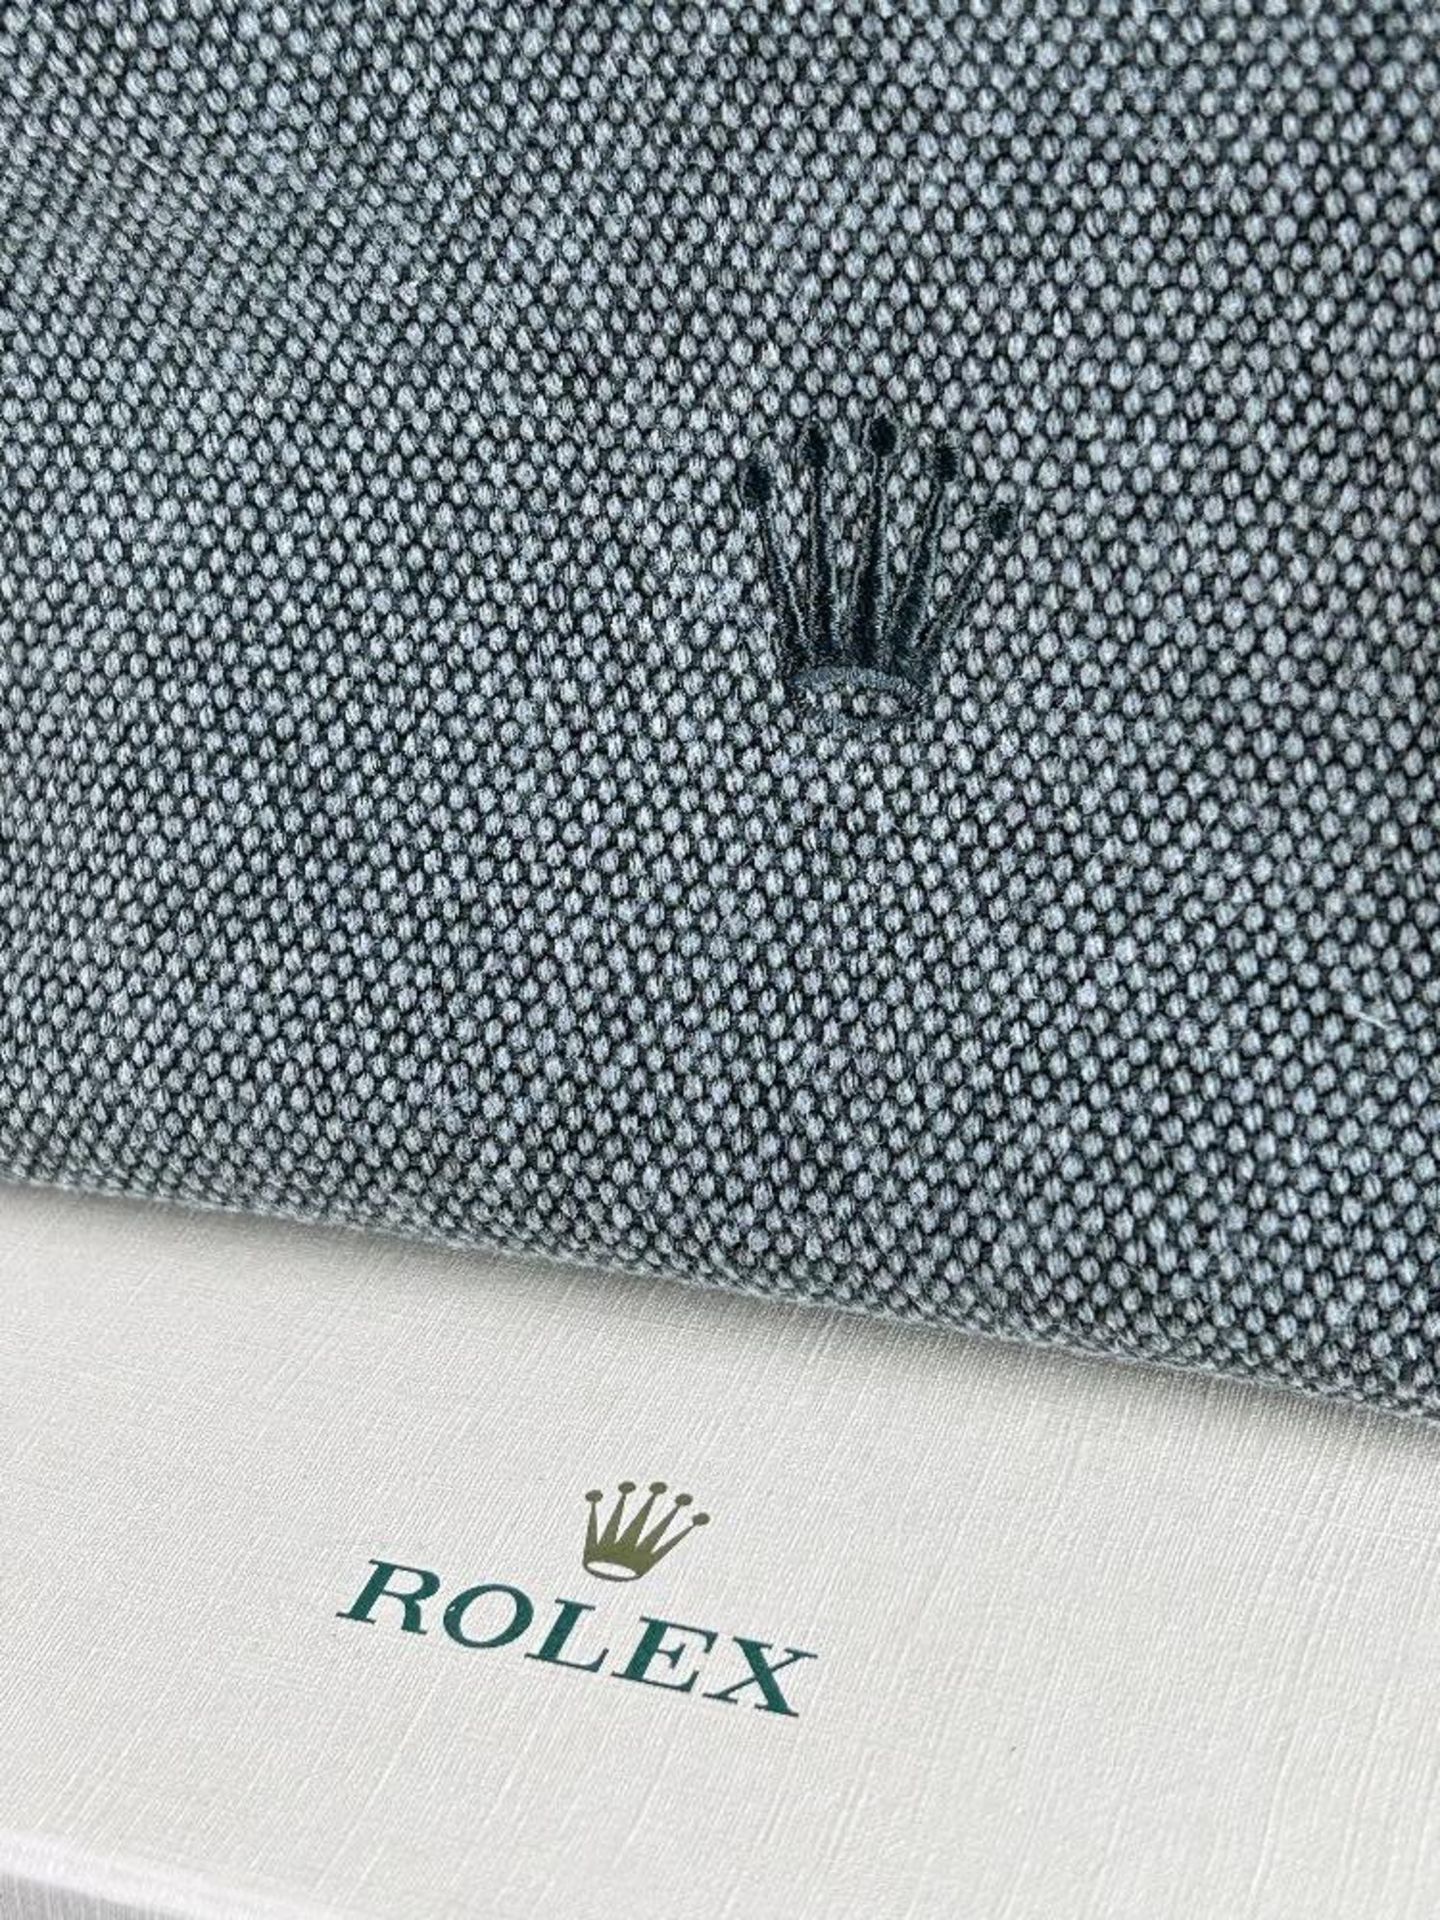 Rolex Official Merchandise Overnight Bag-New Example - Image 4 of 9